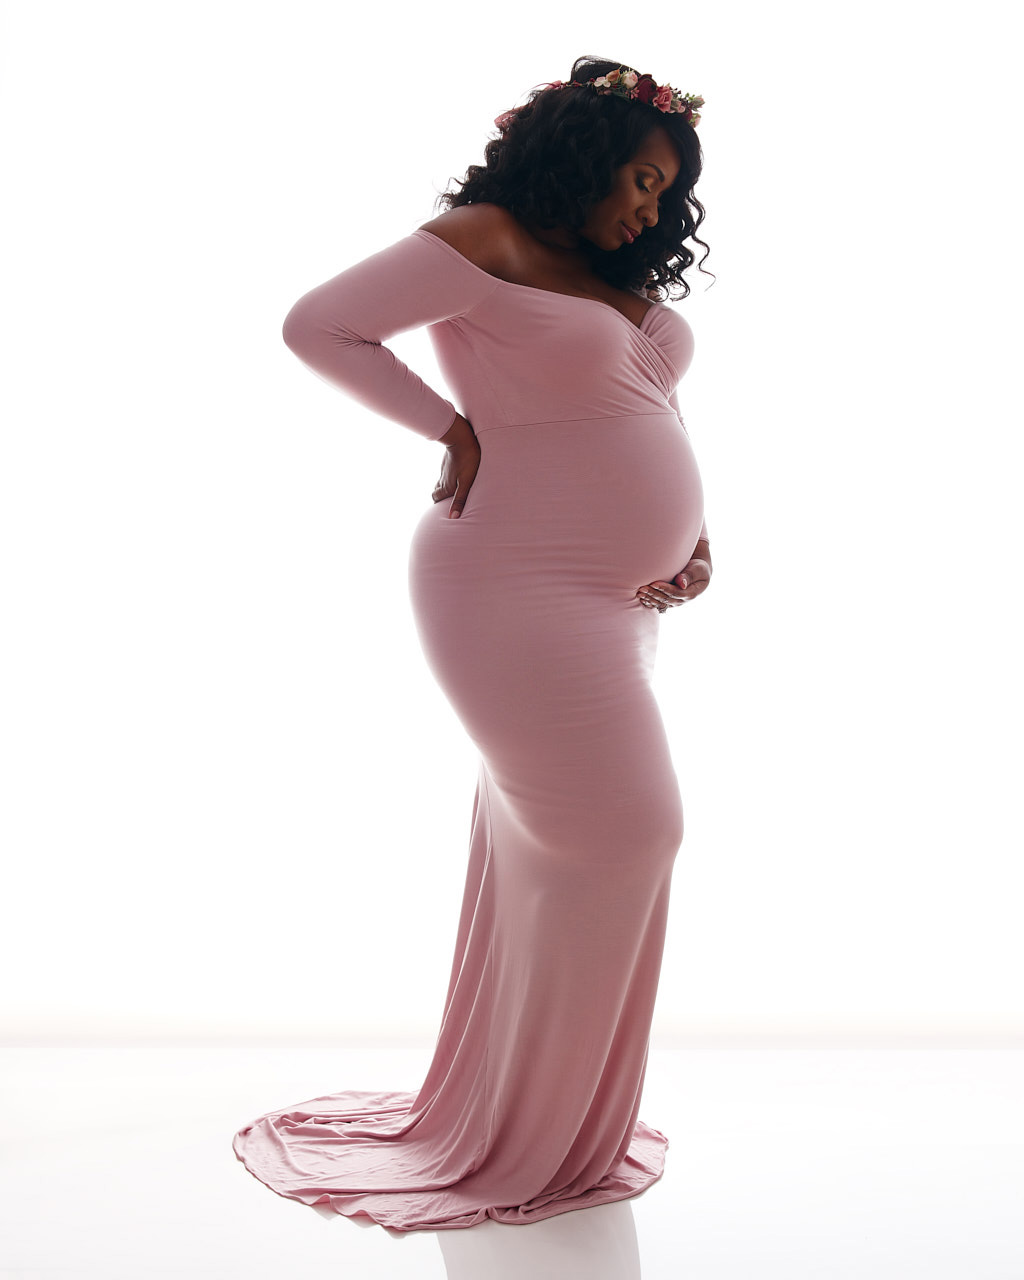 Pregnant woman of maternity portrait silhoutte in pink snug gown. Maternity portrait photographer near Washington DC  Portraits by Jared Wolfe in Alexandria VA